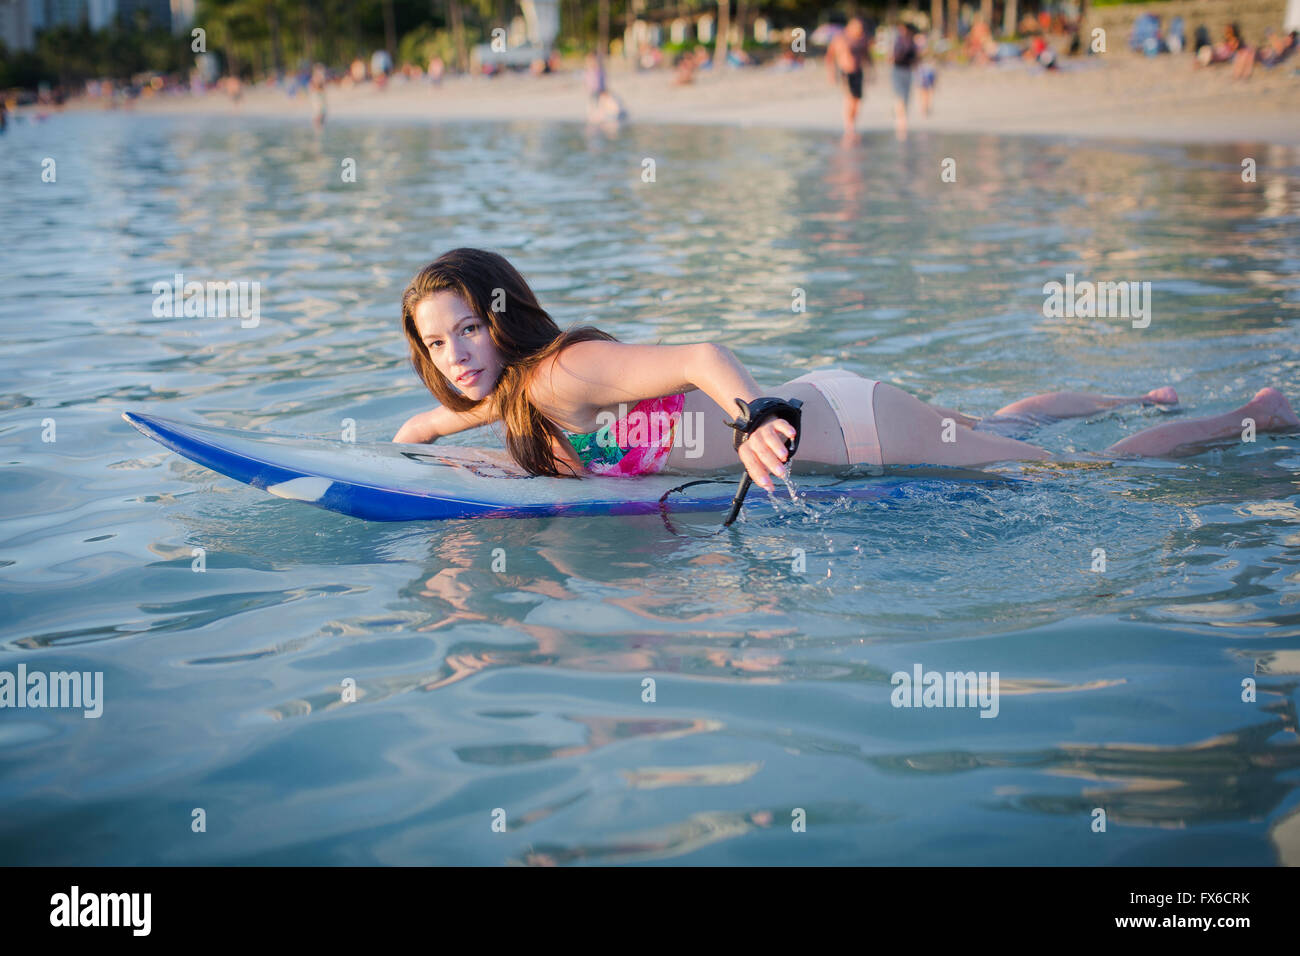 Mixed race amputee swimming with surfboard Stock Photo